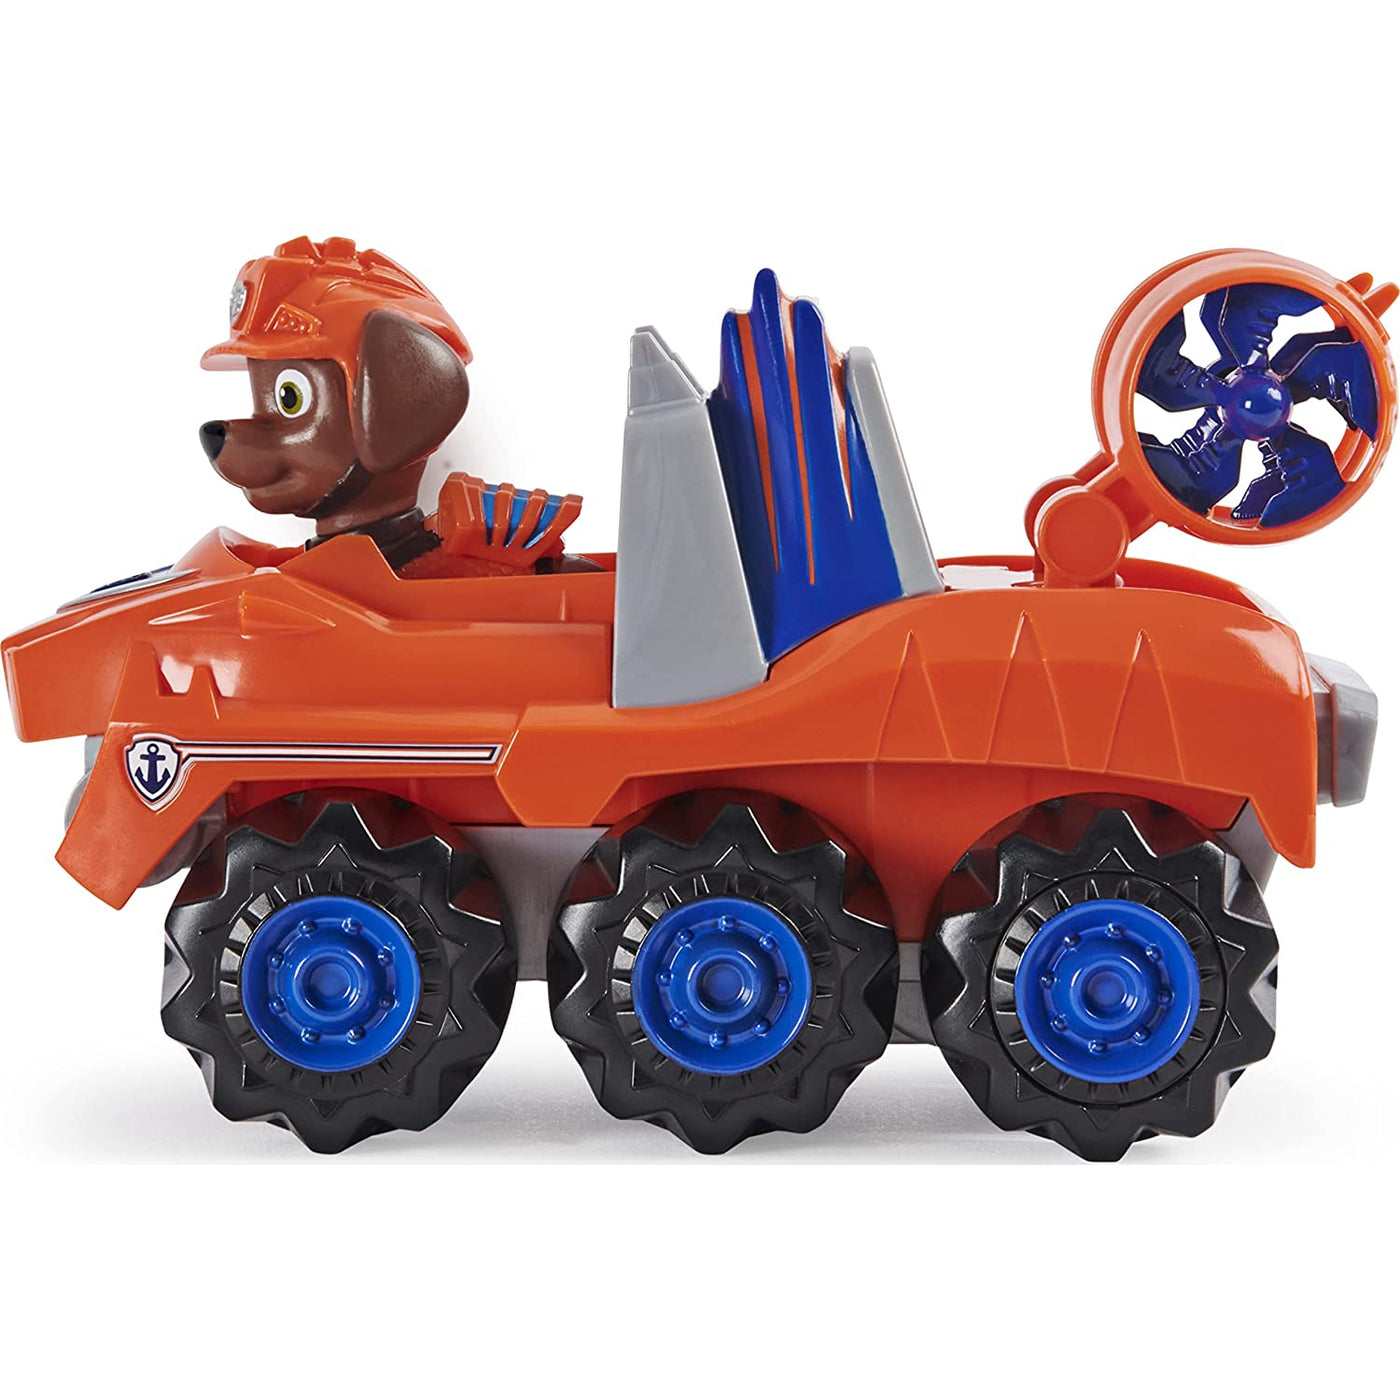 Dino Rescue Zuma Deluxe Rev Up Vehicle with Mystery Dinosaur Figure | Paw Patrol